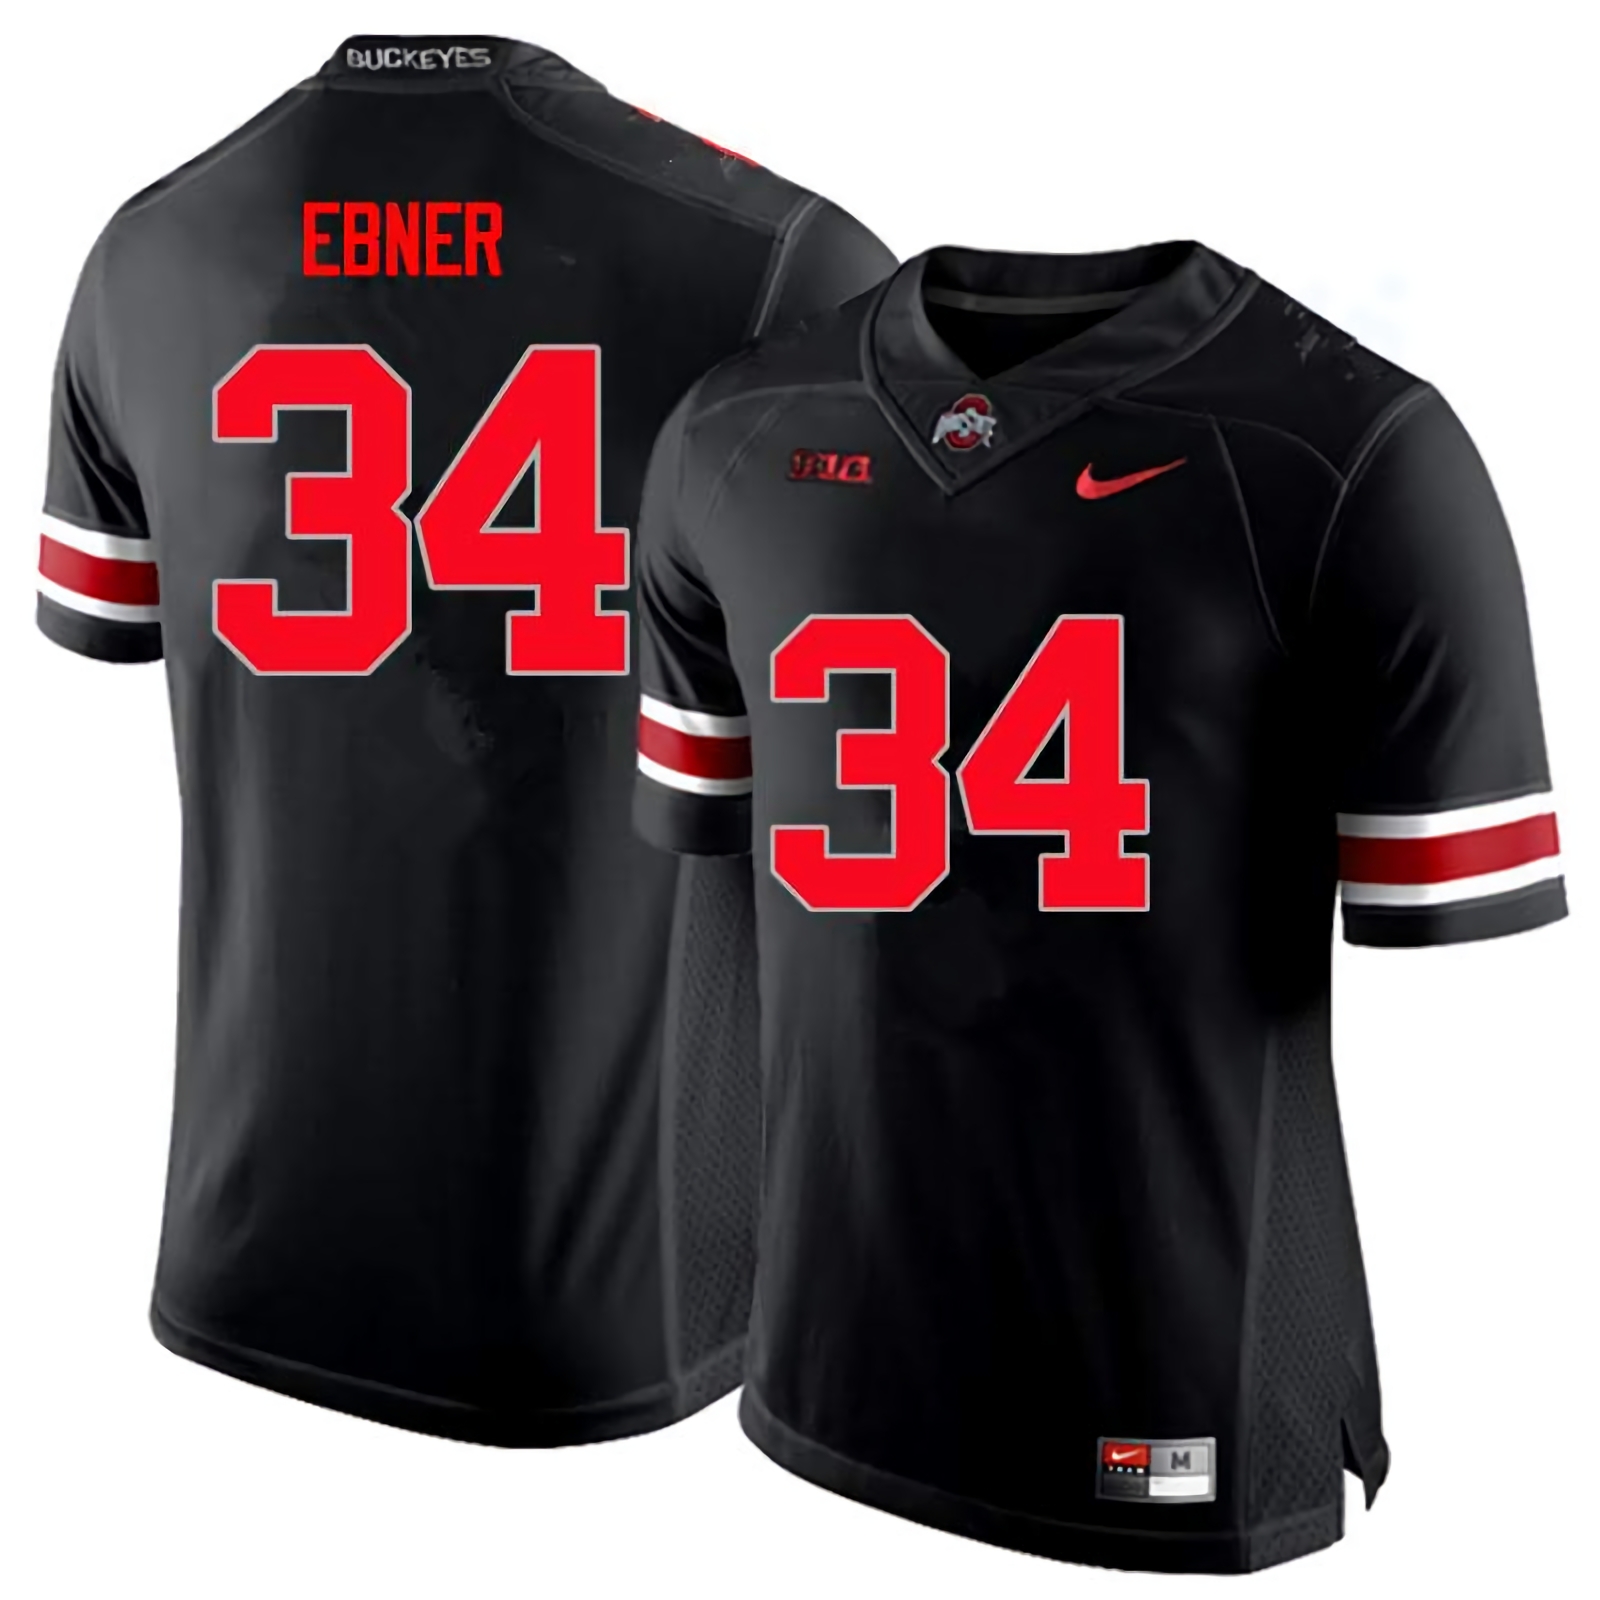 Nate Ebner Ohio State Buckeyes Men's NCAA #34 Nike Black Limited College Stitched Football Jersey KYM5556MH